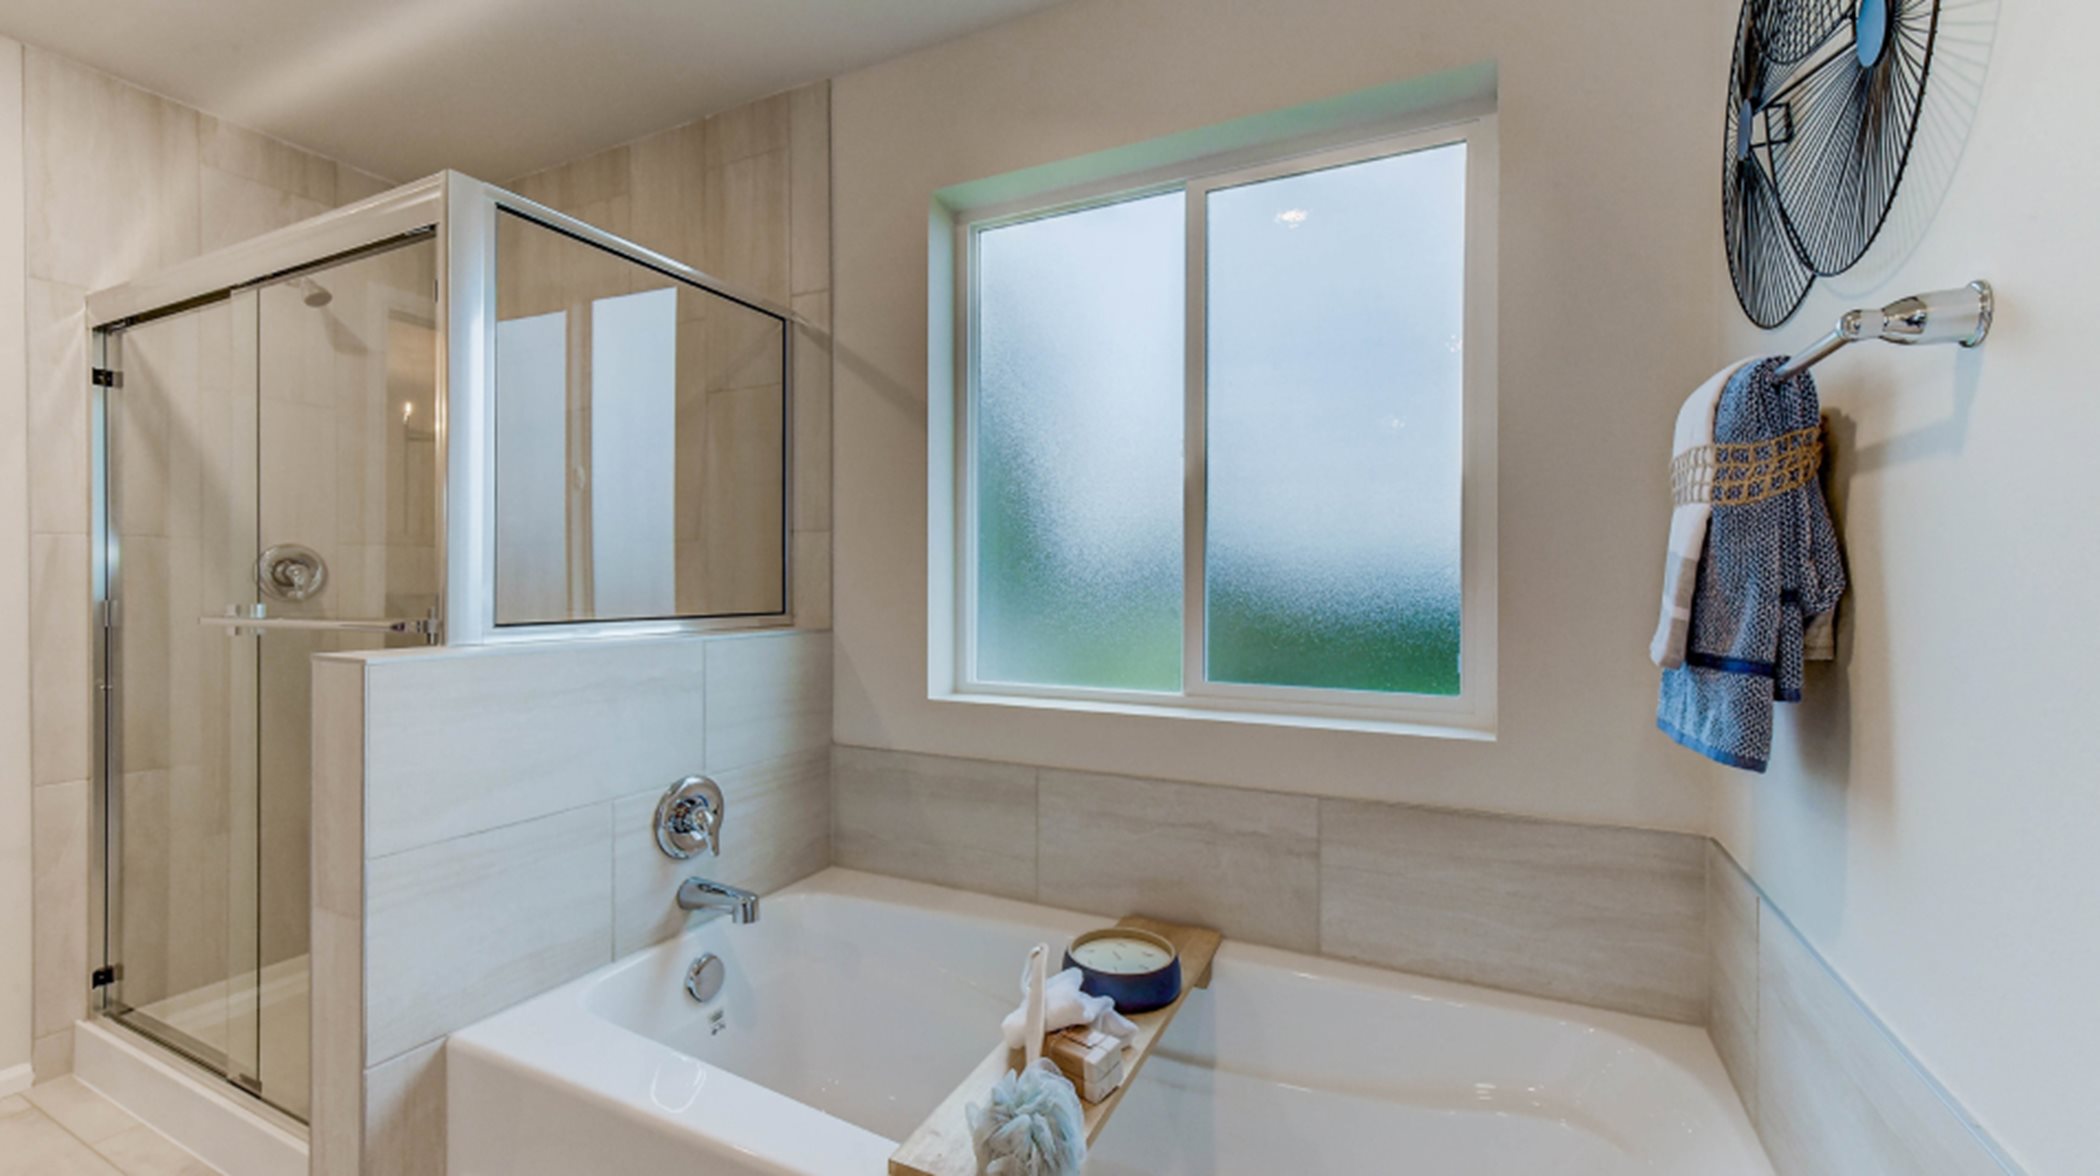 Soaking tub next to the glass-enclosed shower